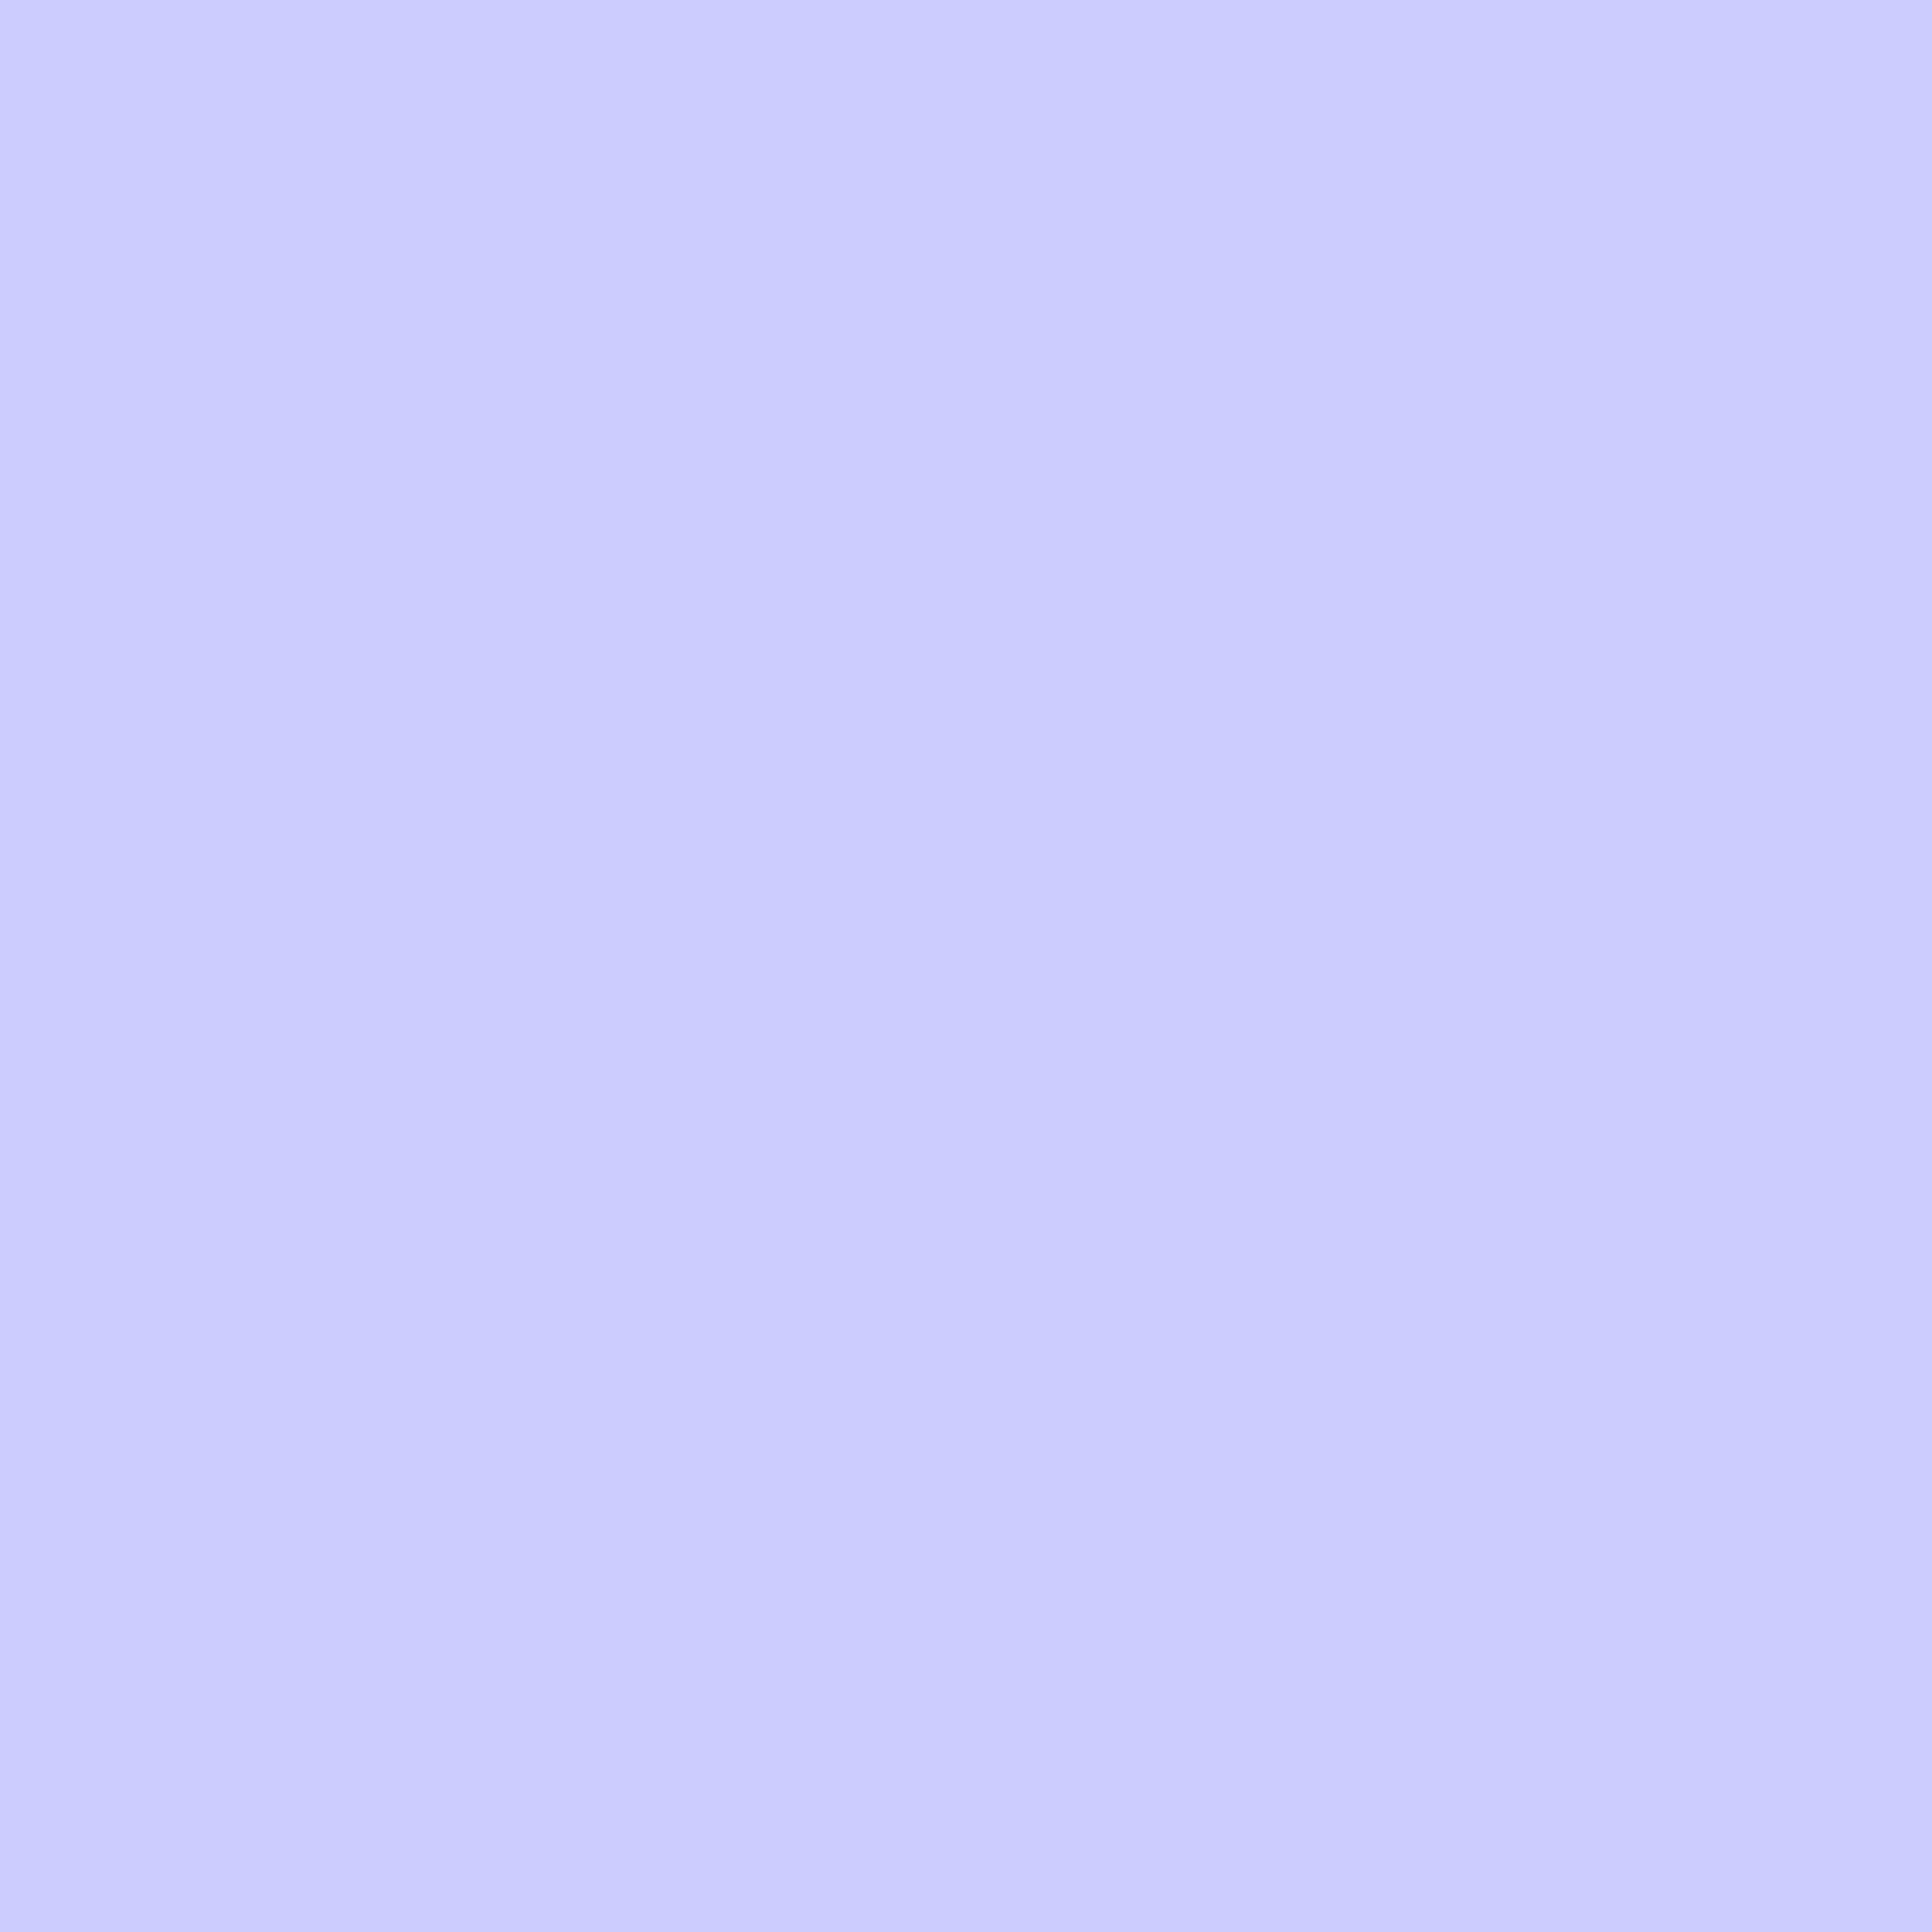 2732x2732 Periwinkle Solid Color Background